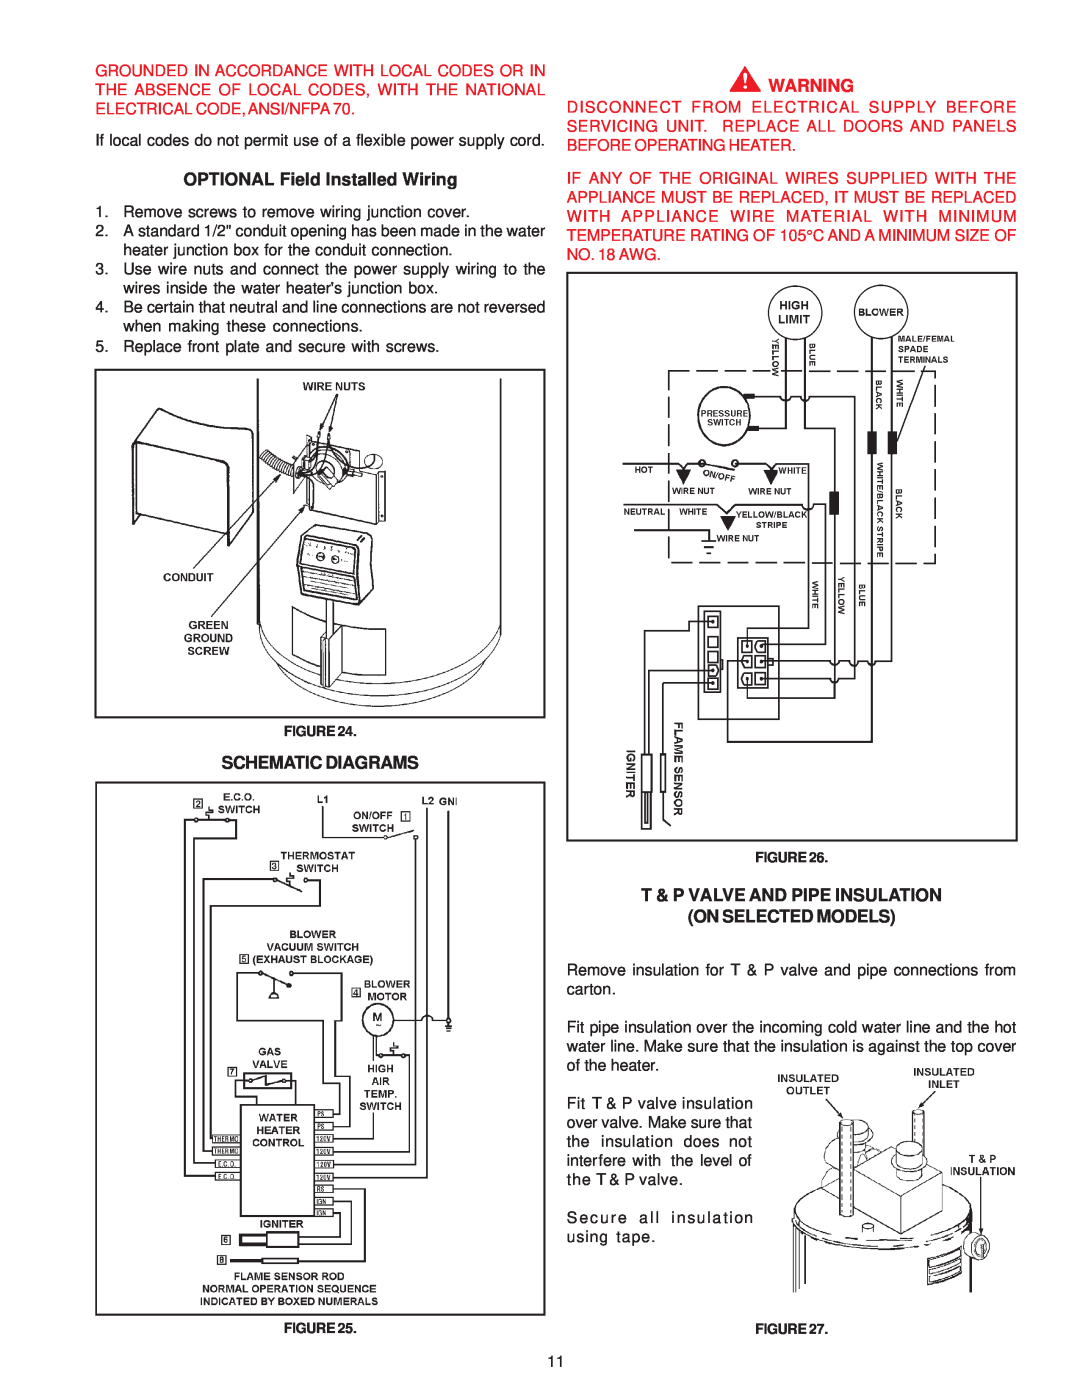 A.O. Smith GPDT OPTIONAL Field Installed Wiring, Schematic Diagrams, T & P Valve And Pipe Insulation On Selected Models 